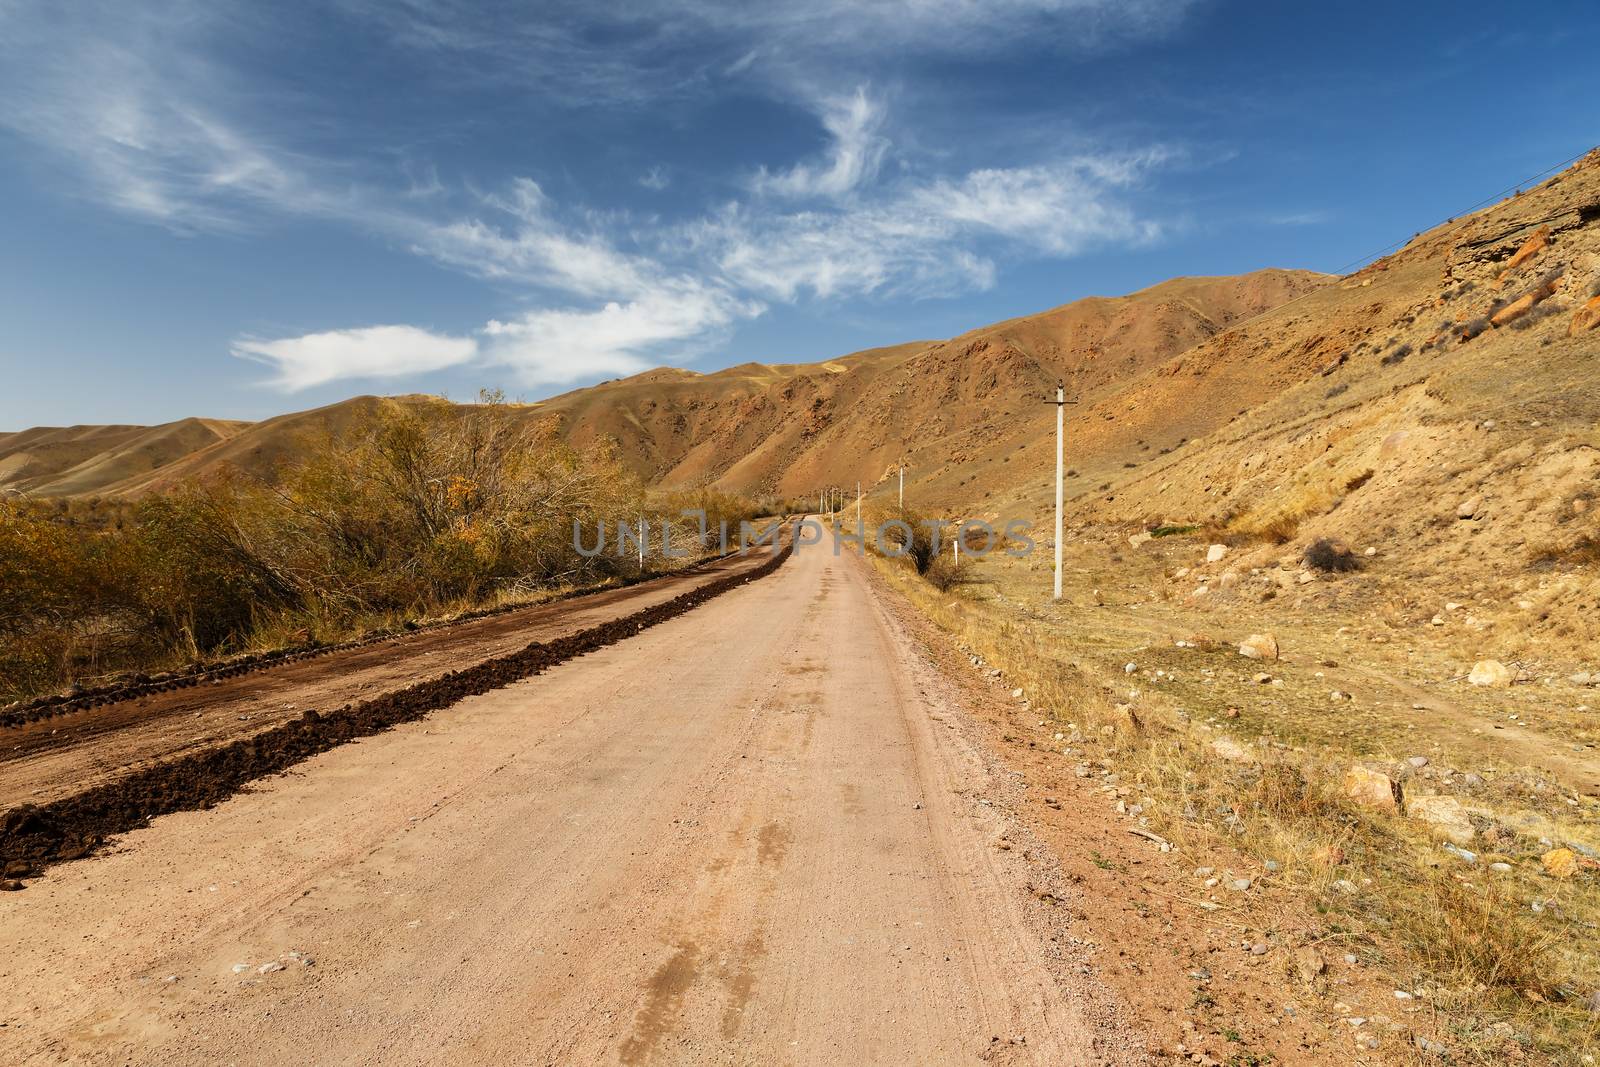 A 367 highway, passing in the Chui region, Kyrgyzstan by Mieszko9